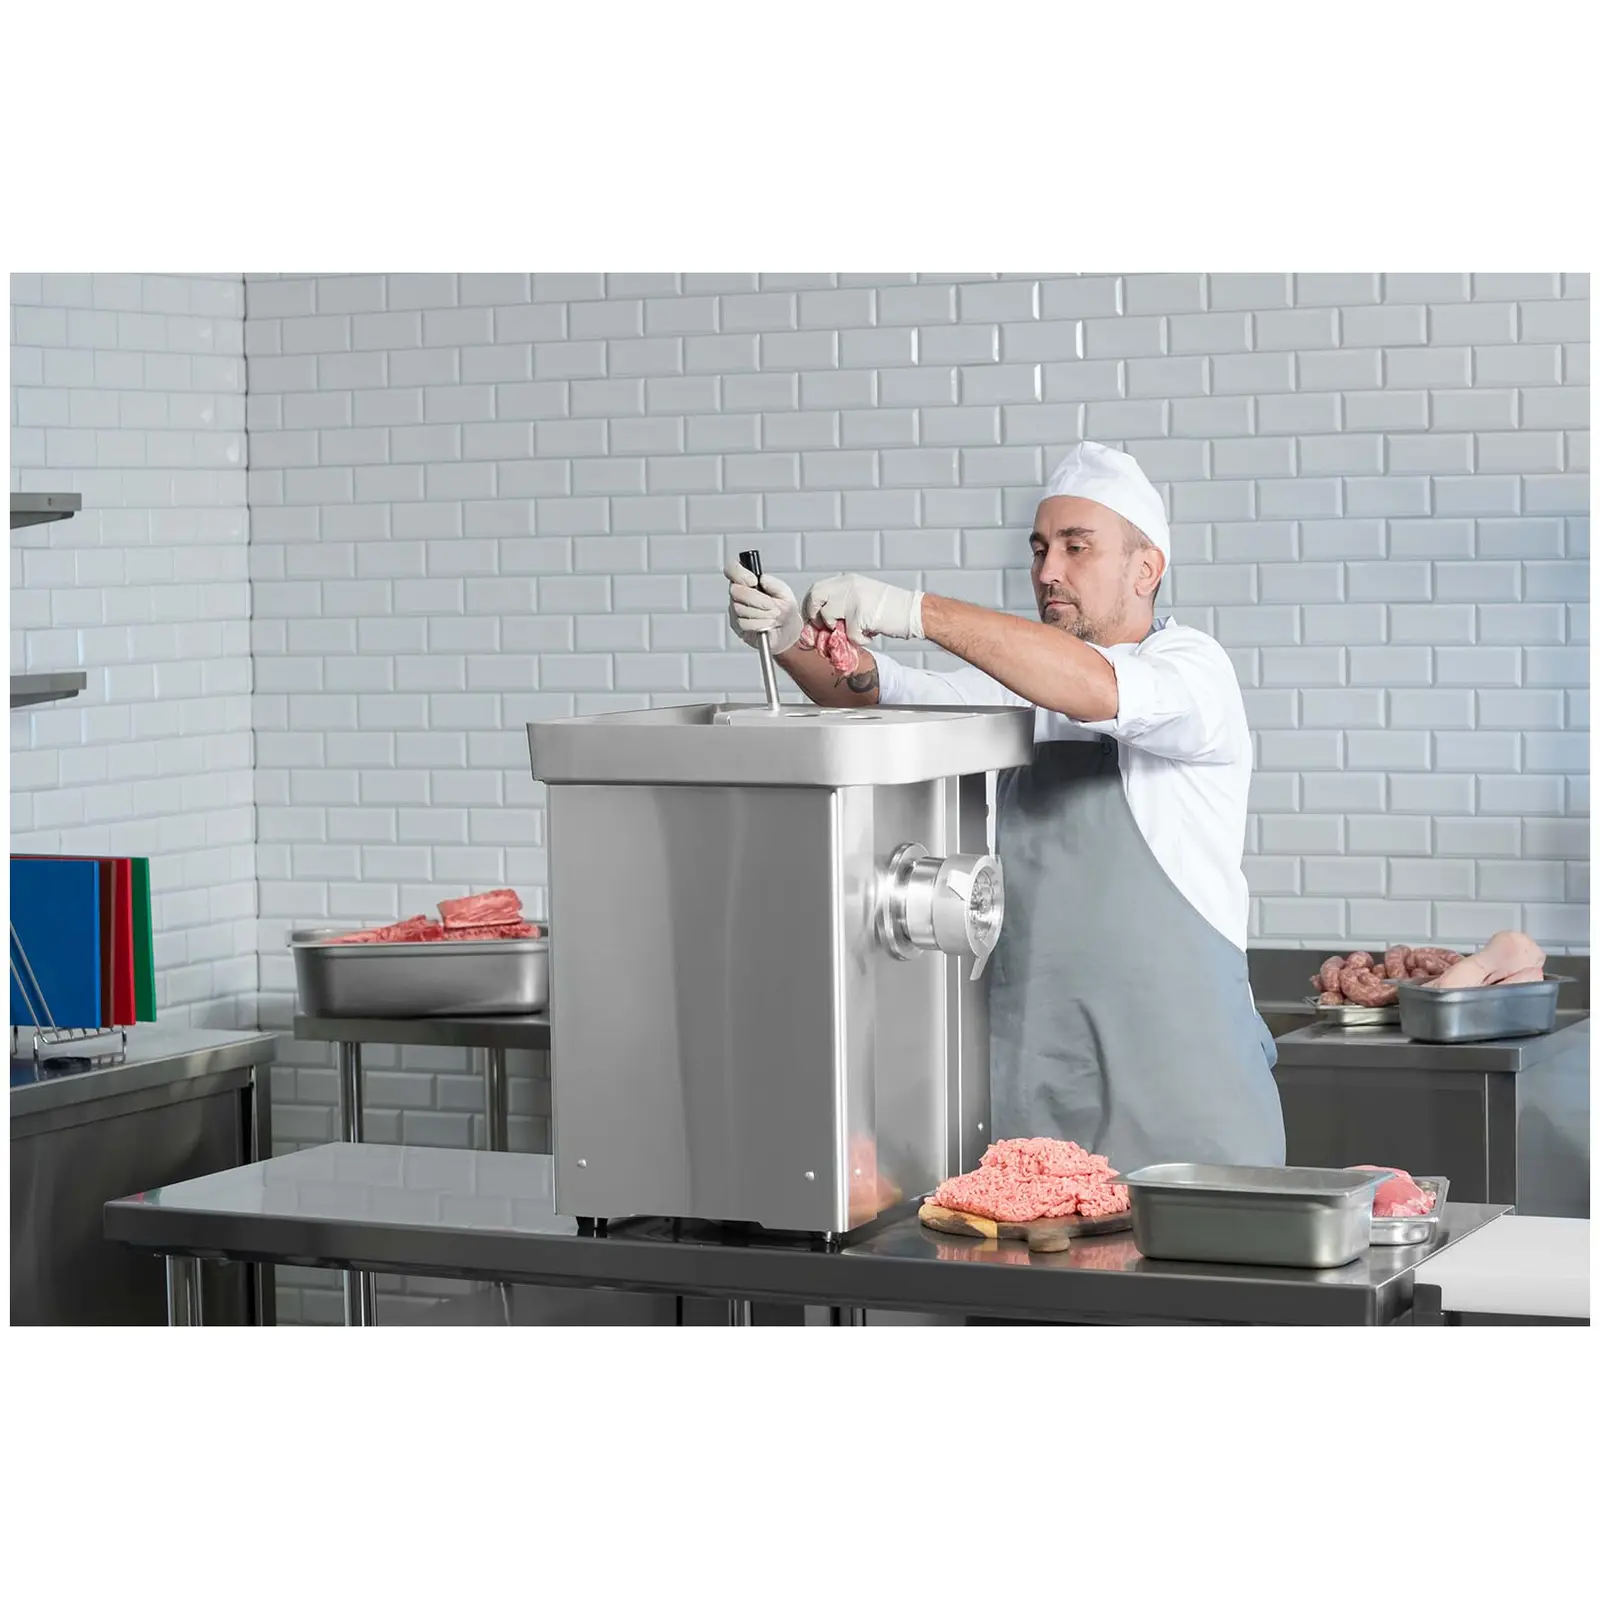 Meat Grinder - stainless steel - 800 kg/hr - with reverse gear